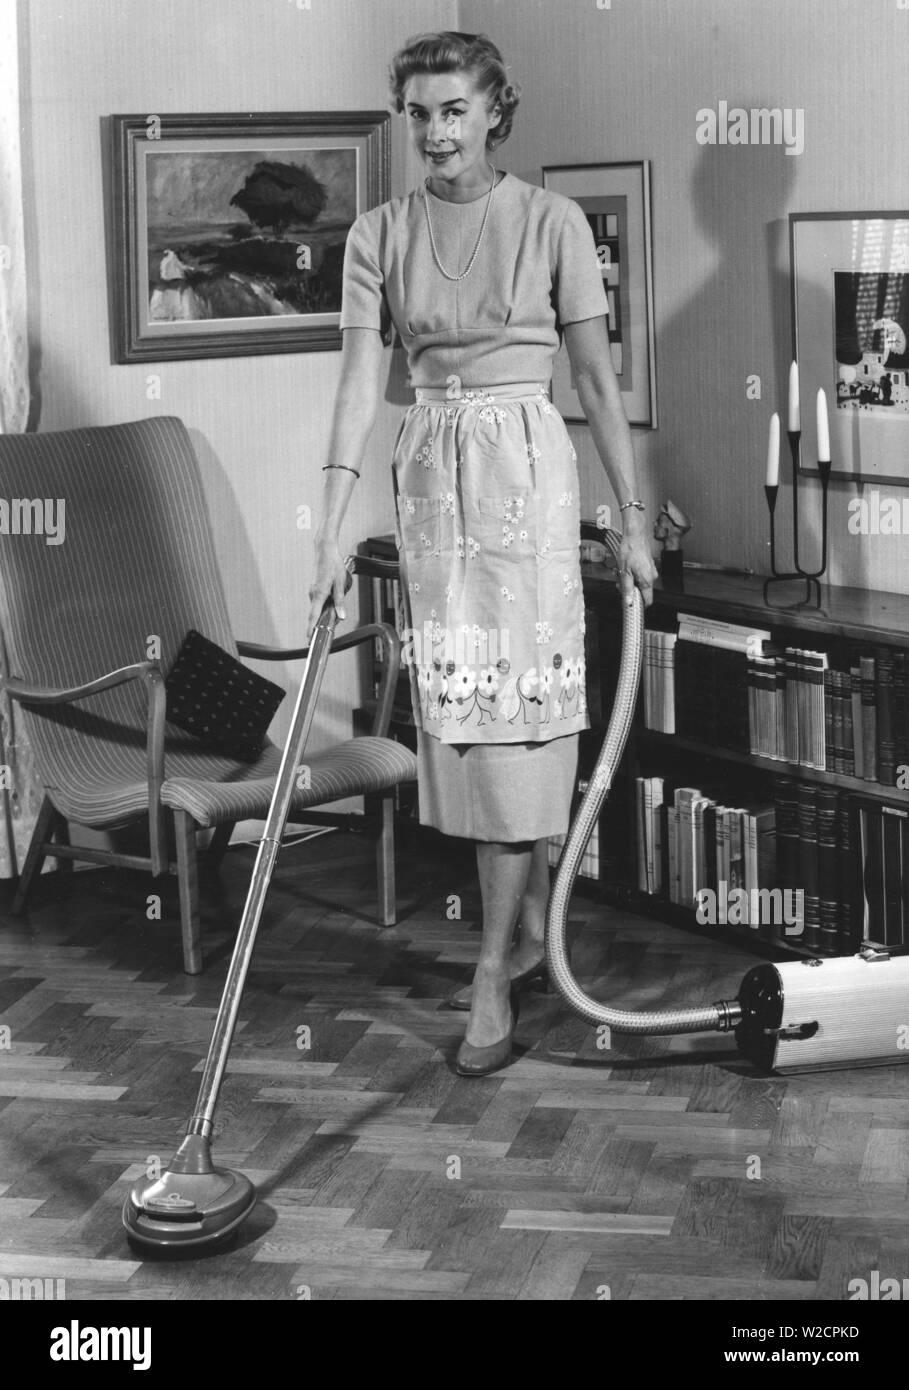 Cleaning day in the 1950s. A young housewife is vacuuming the floor using the latest model from Electrolux. The model can also be used to polish floors and she uses the device. Sweden 1950 Stock Photo